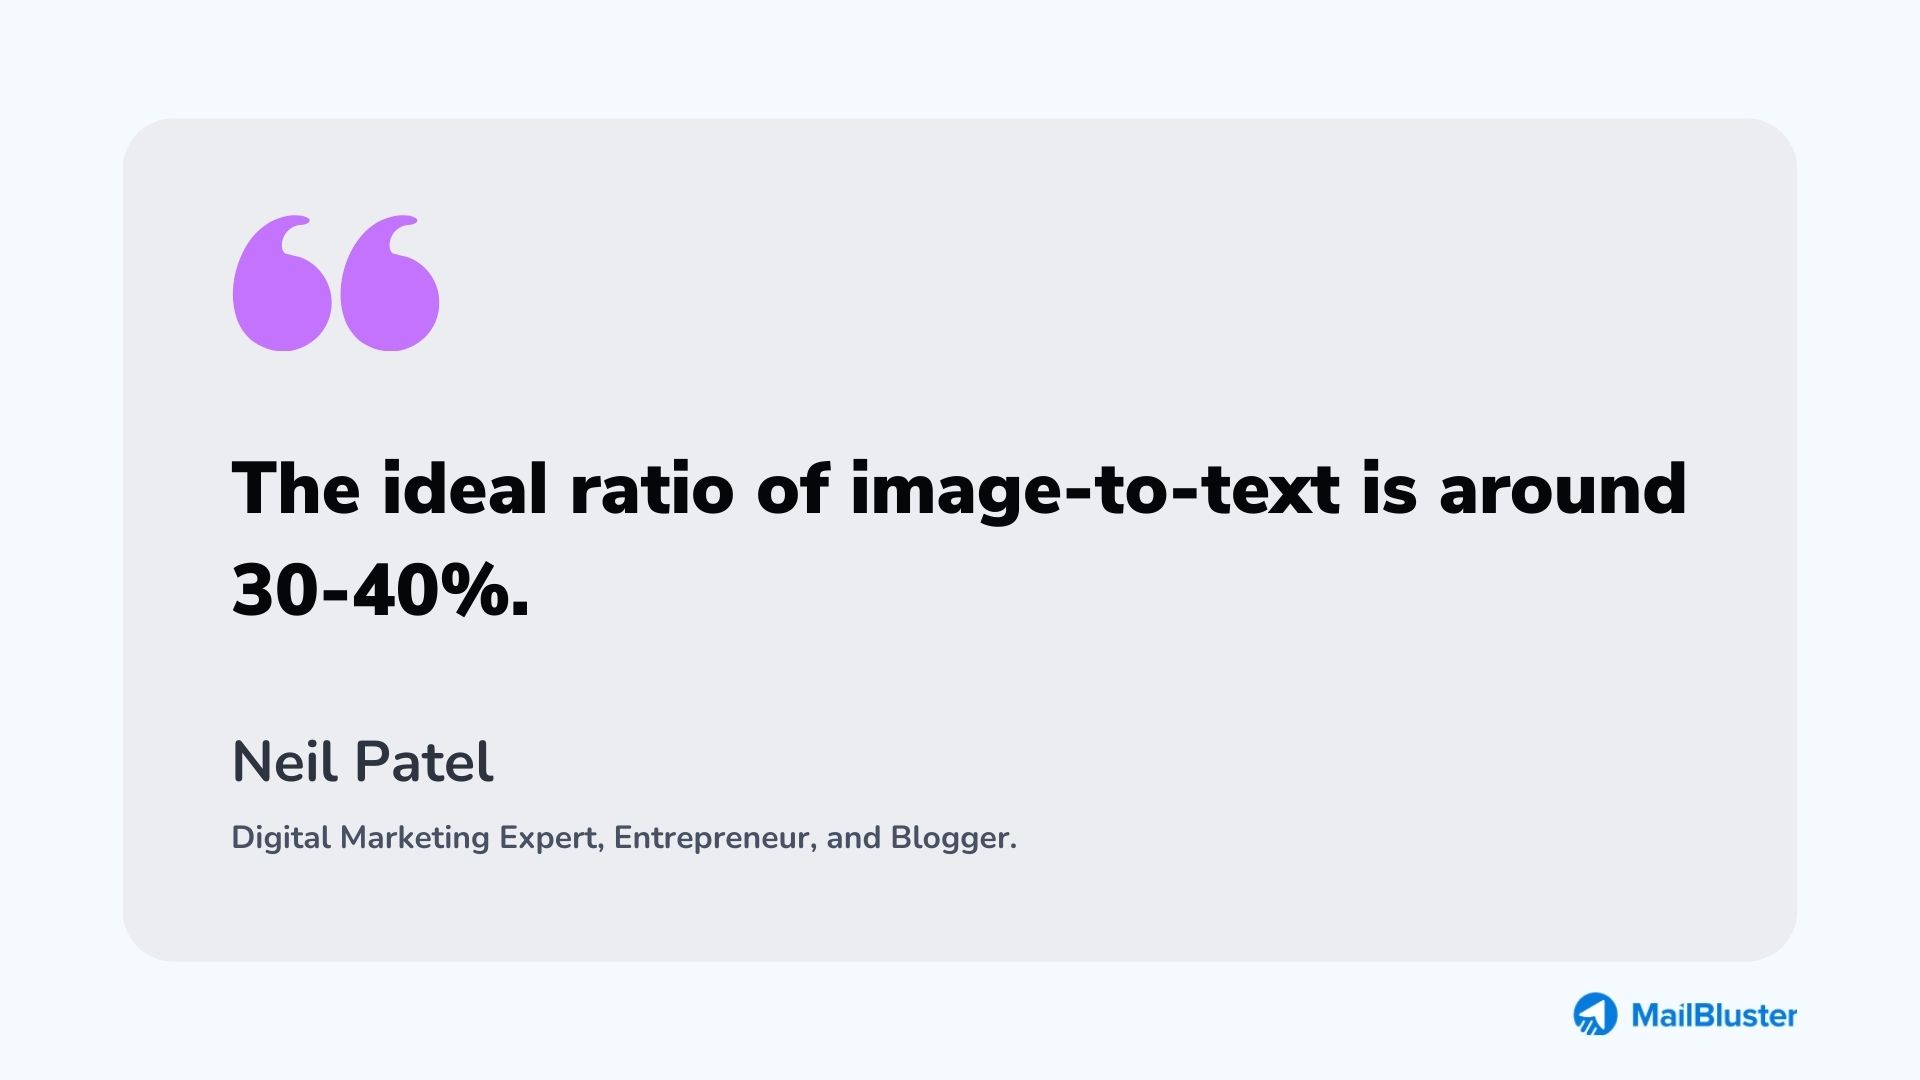 The ideal ratio of image-to-text is around 30-40%